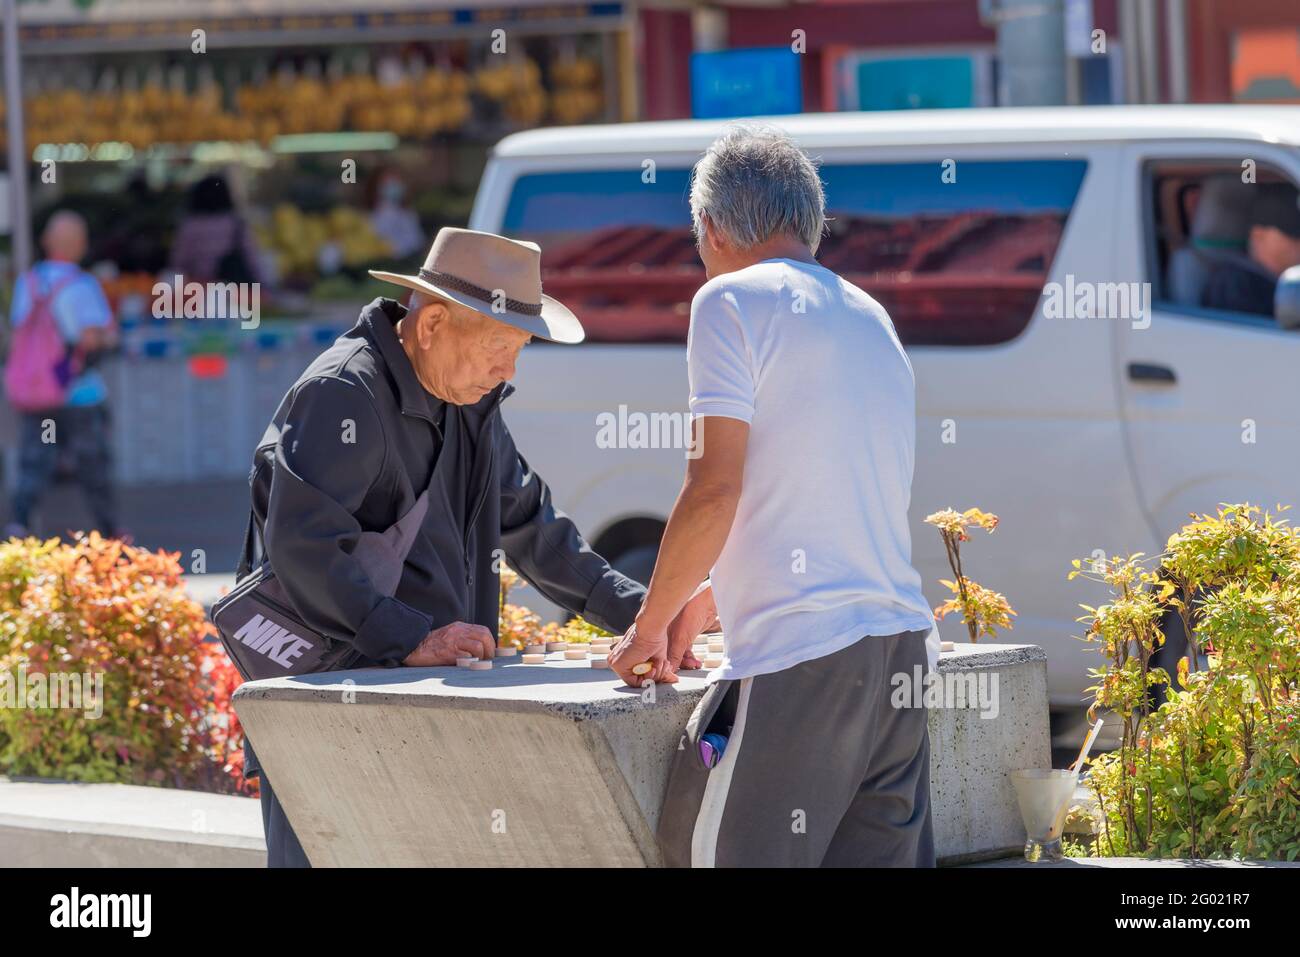 A large concrete anti-terrorist vehicle barrier doubles as a mahjong table for two men in the Sydney suburb of Cabramatta New South Wales, Australia Stock Photo